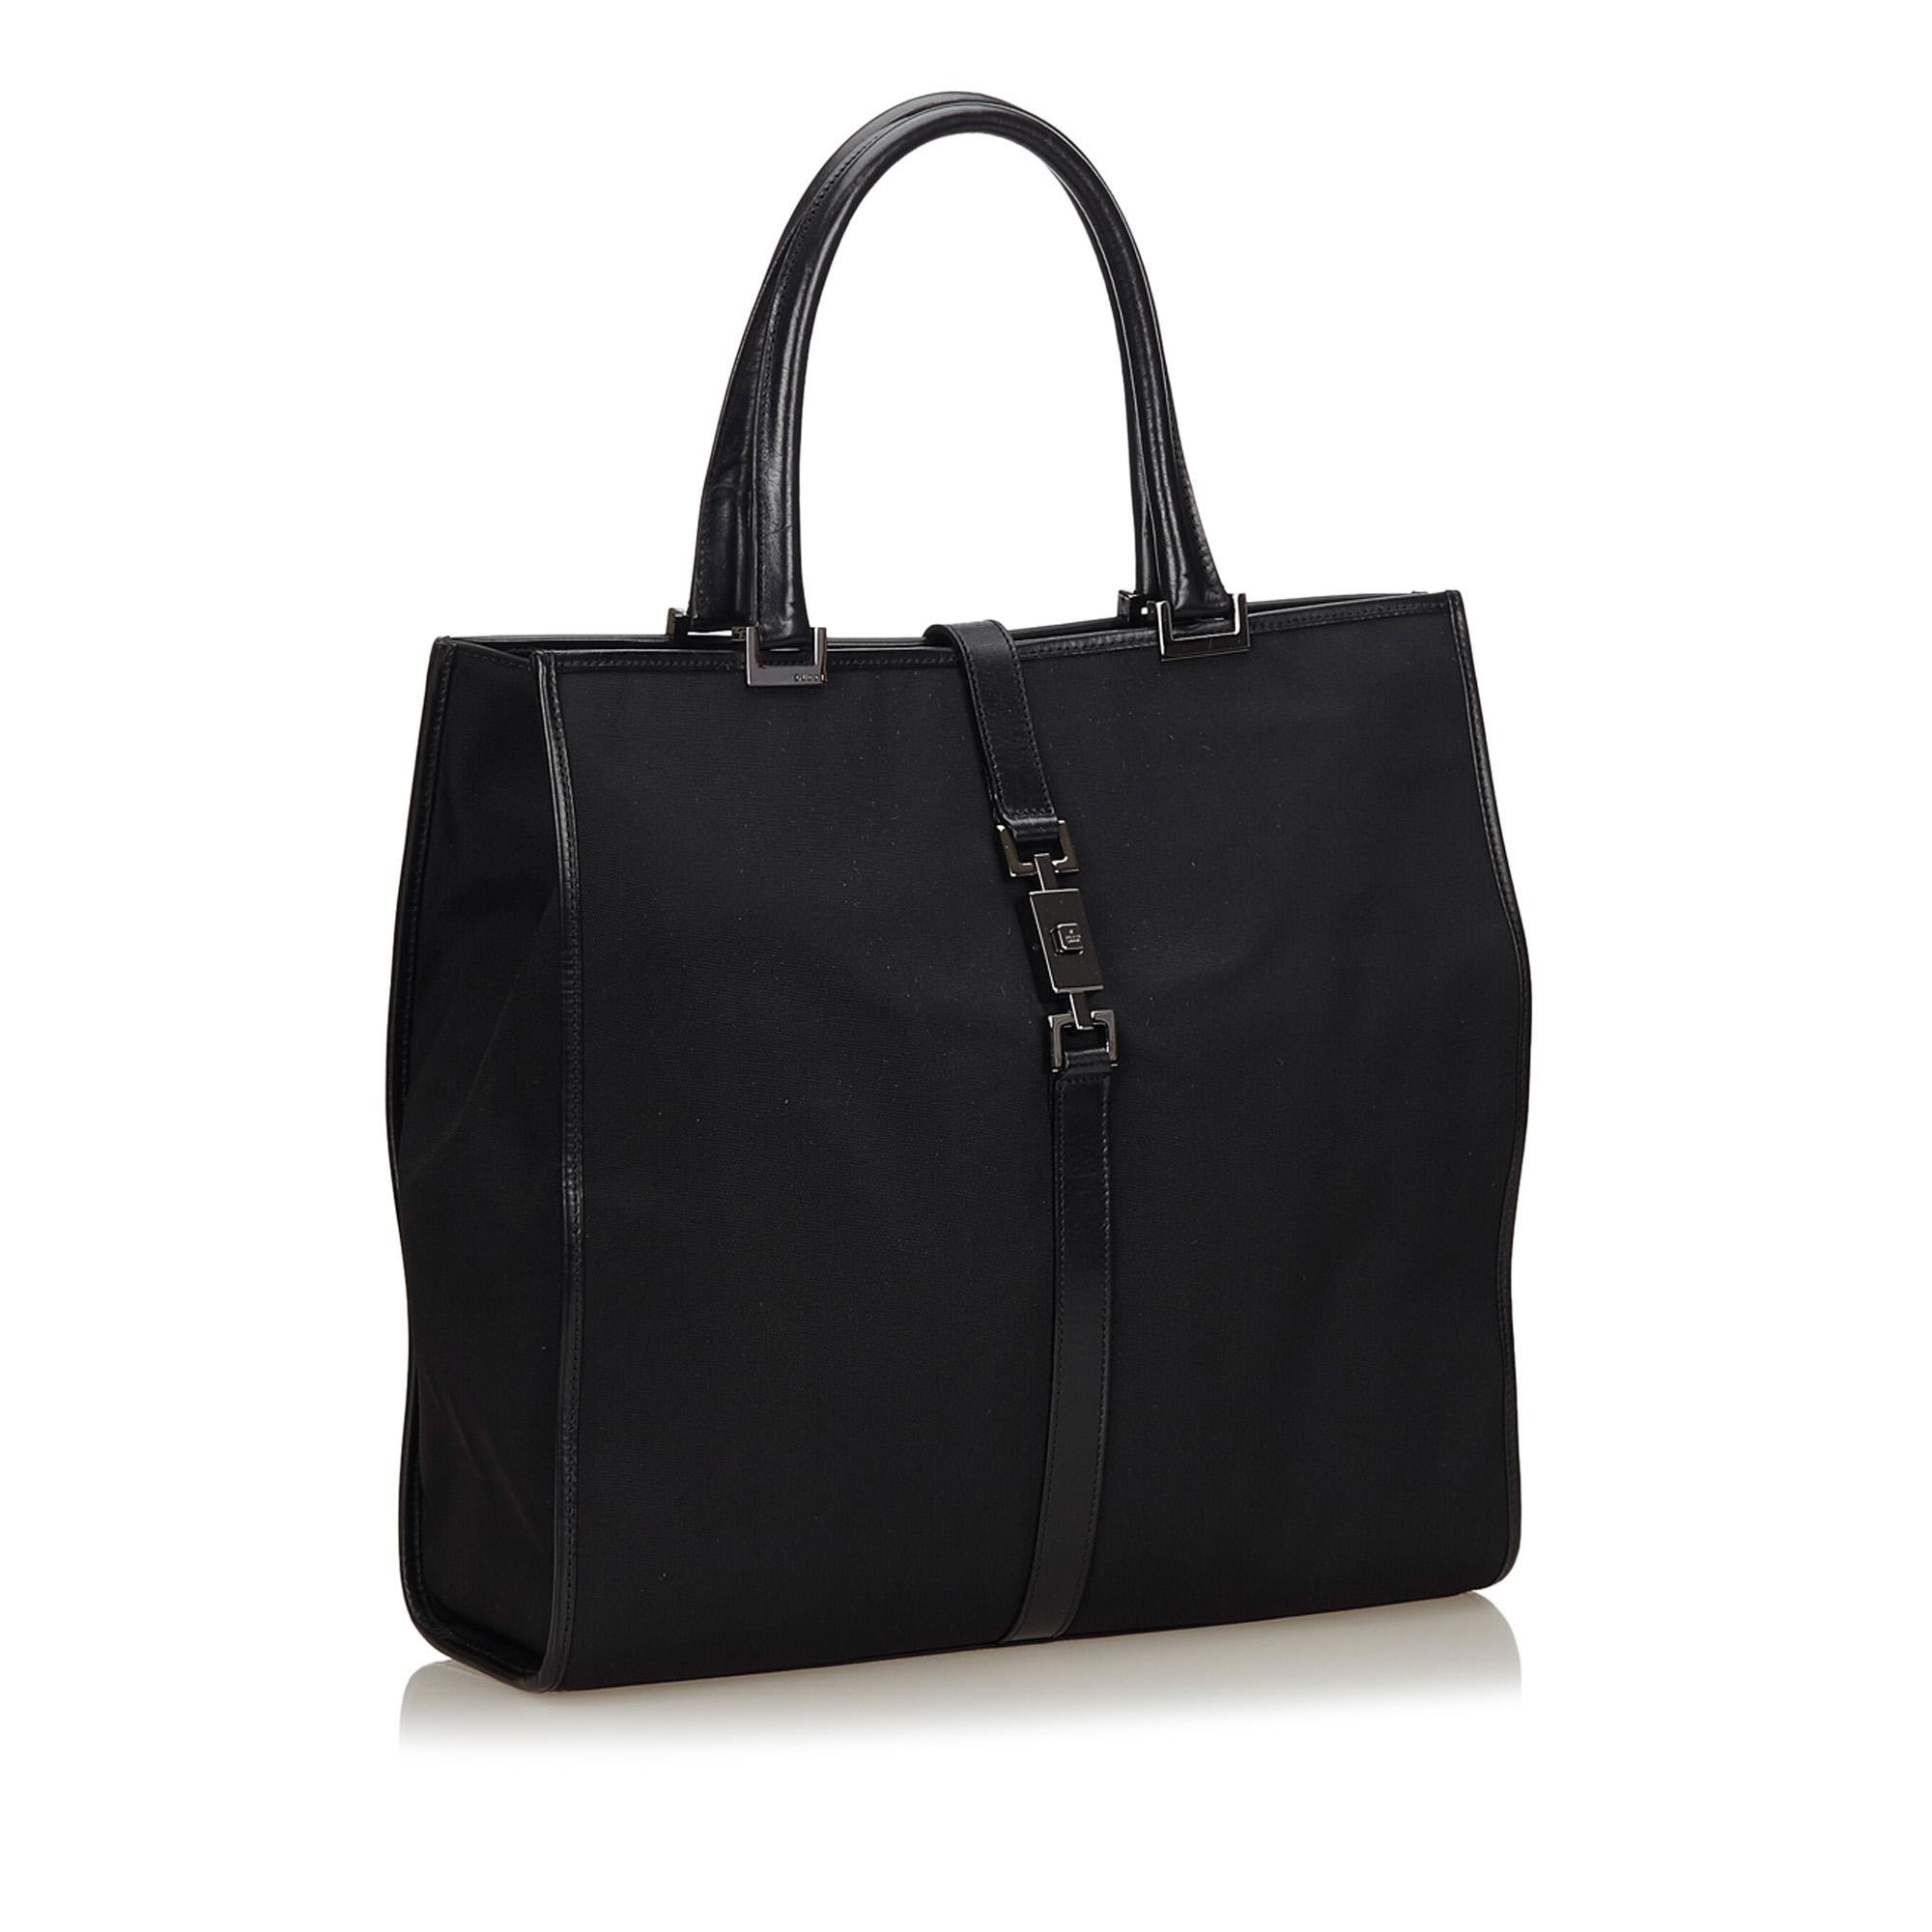 This tote bag features a nylon body with leather trim, rolled leather handles, open top with Jackie strap and interior zip pocket. It carries as A condition rating.

Inclusions: 
Dust Bag

Dimensions:
Length: 33.00 cm
Width: 31.00 cm
Depth: 7.00